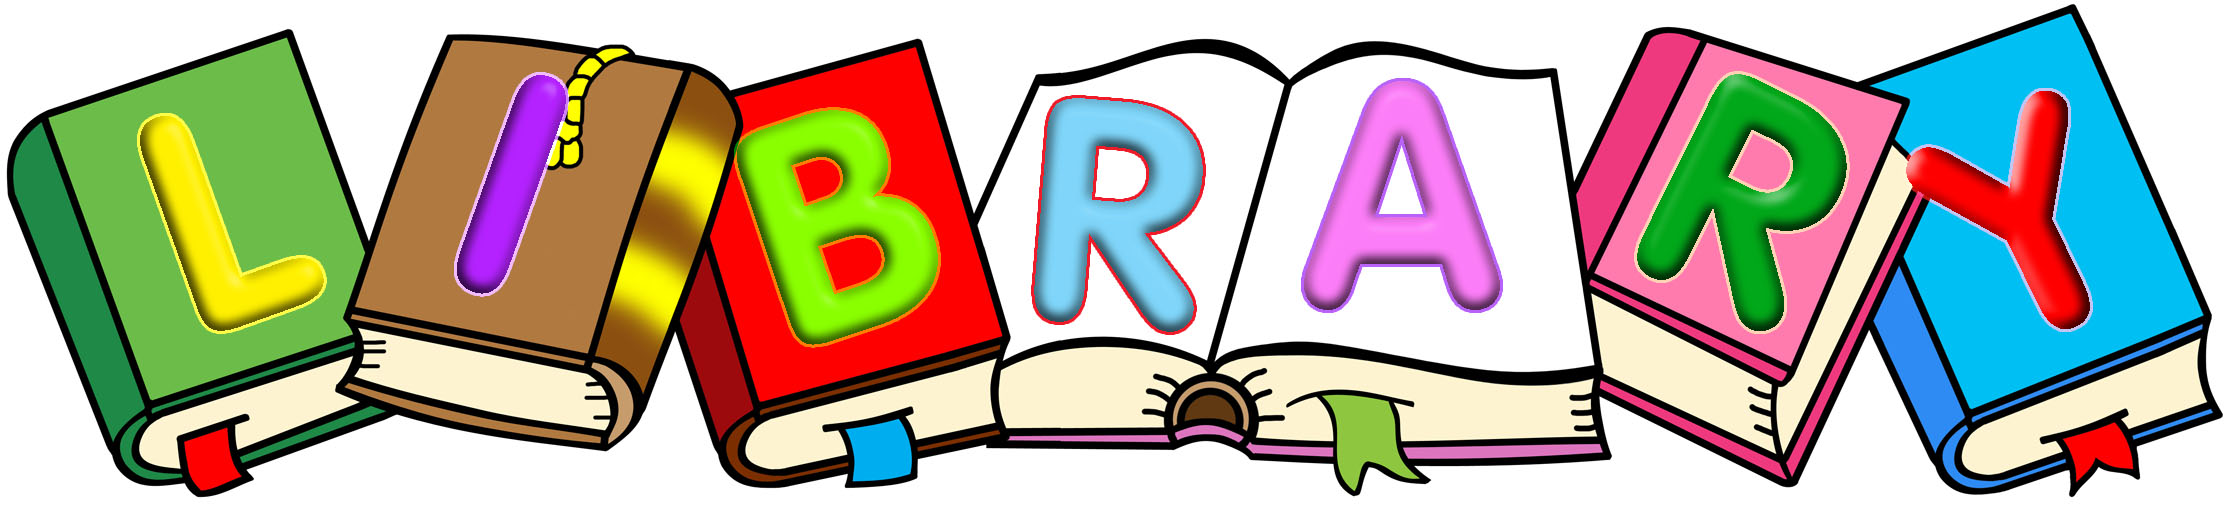 Library librarian clipart free clipart images clipartix 2